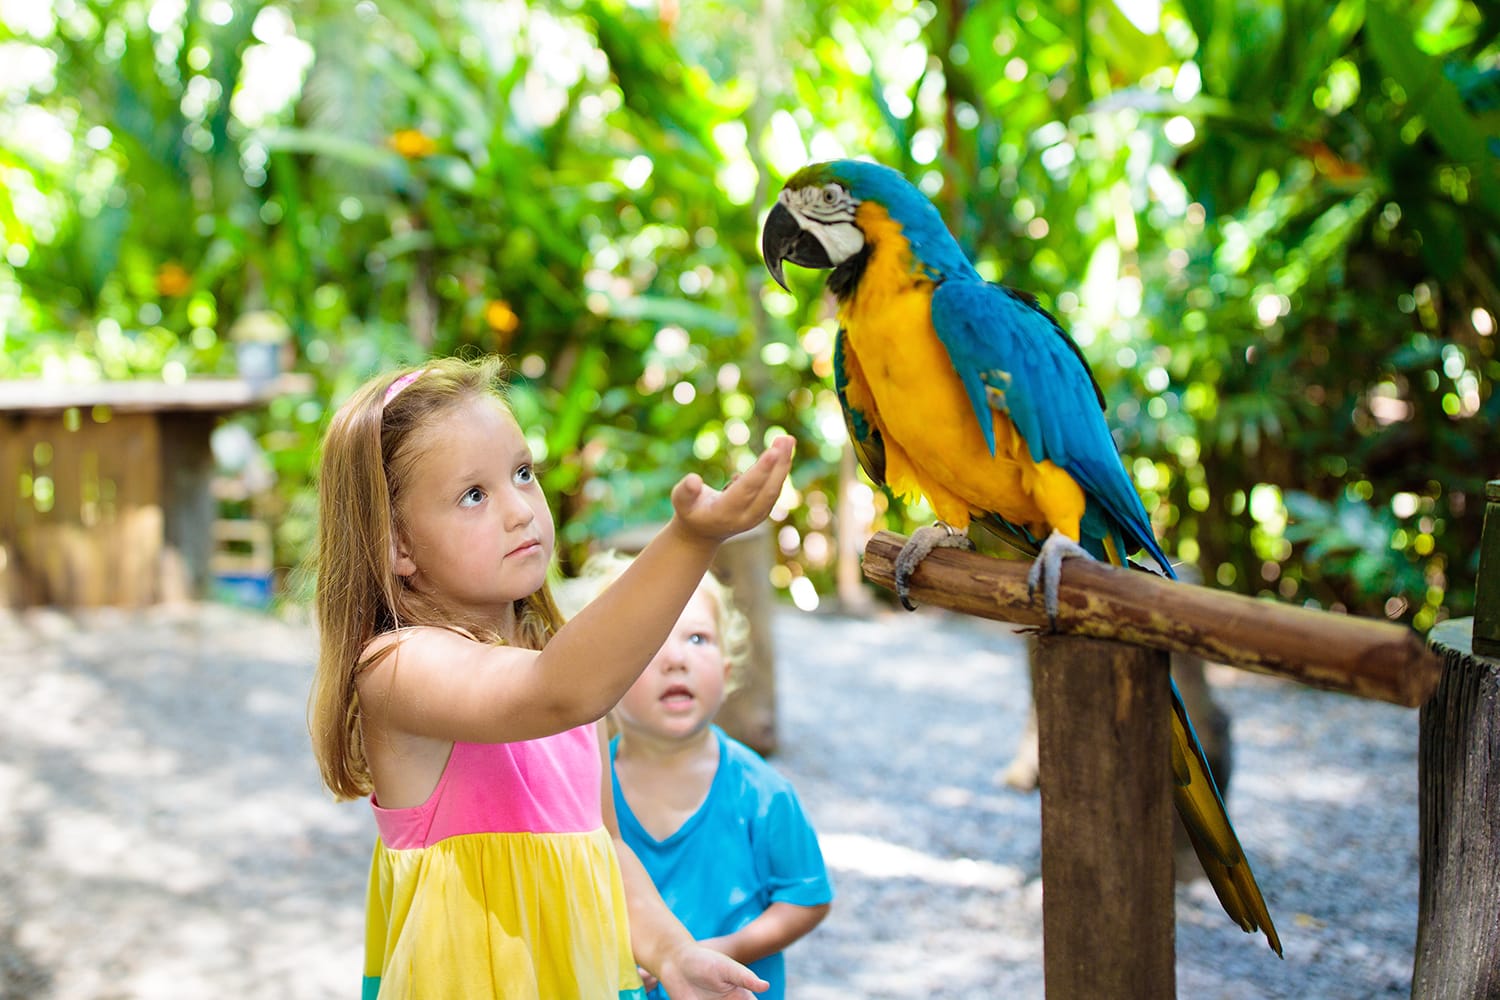 Kid feeding macaw parrot in tropical zoo